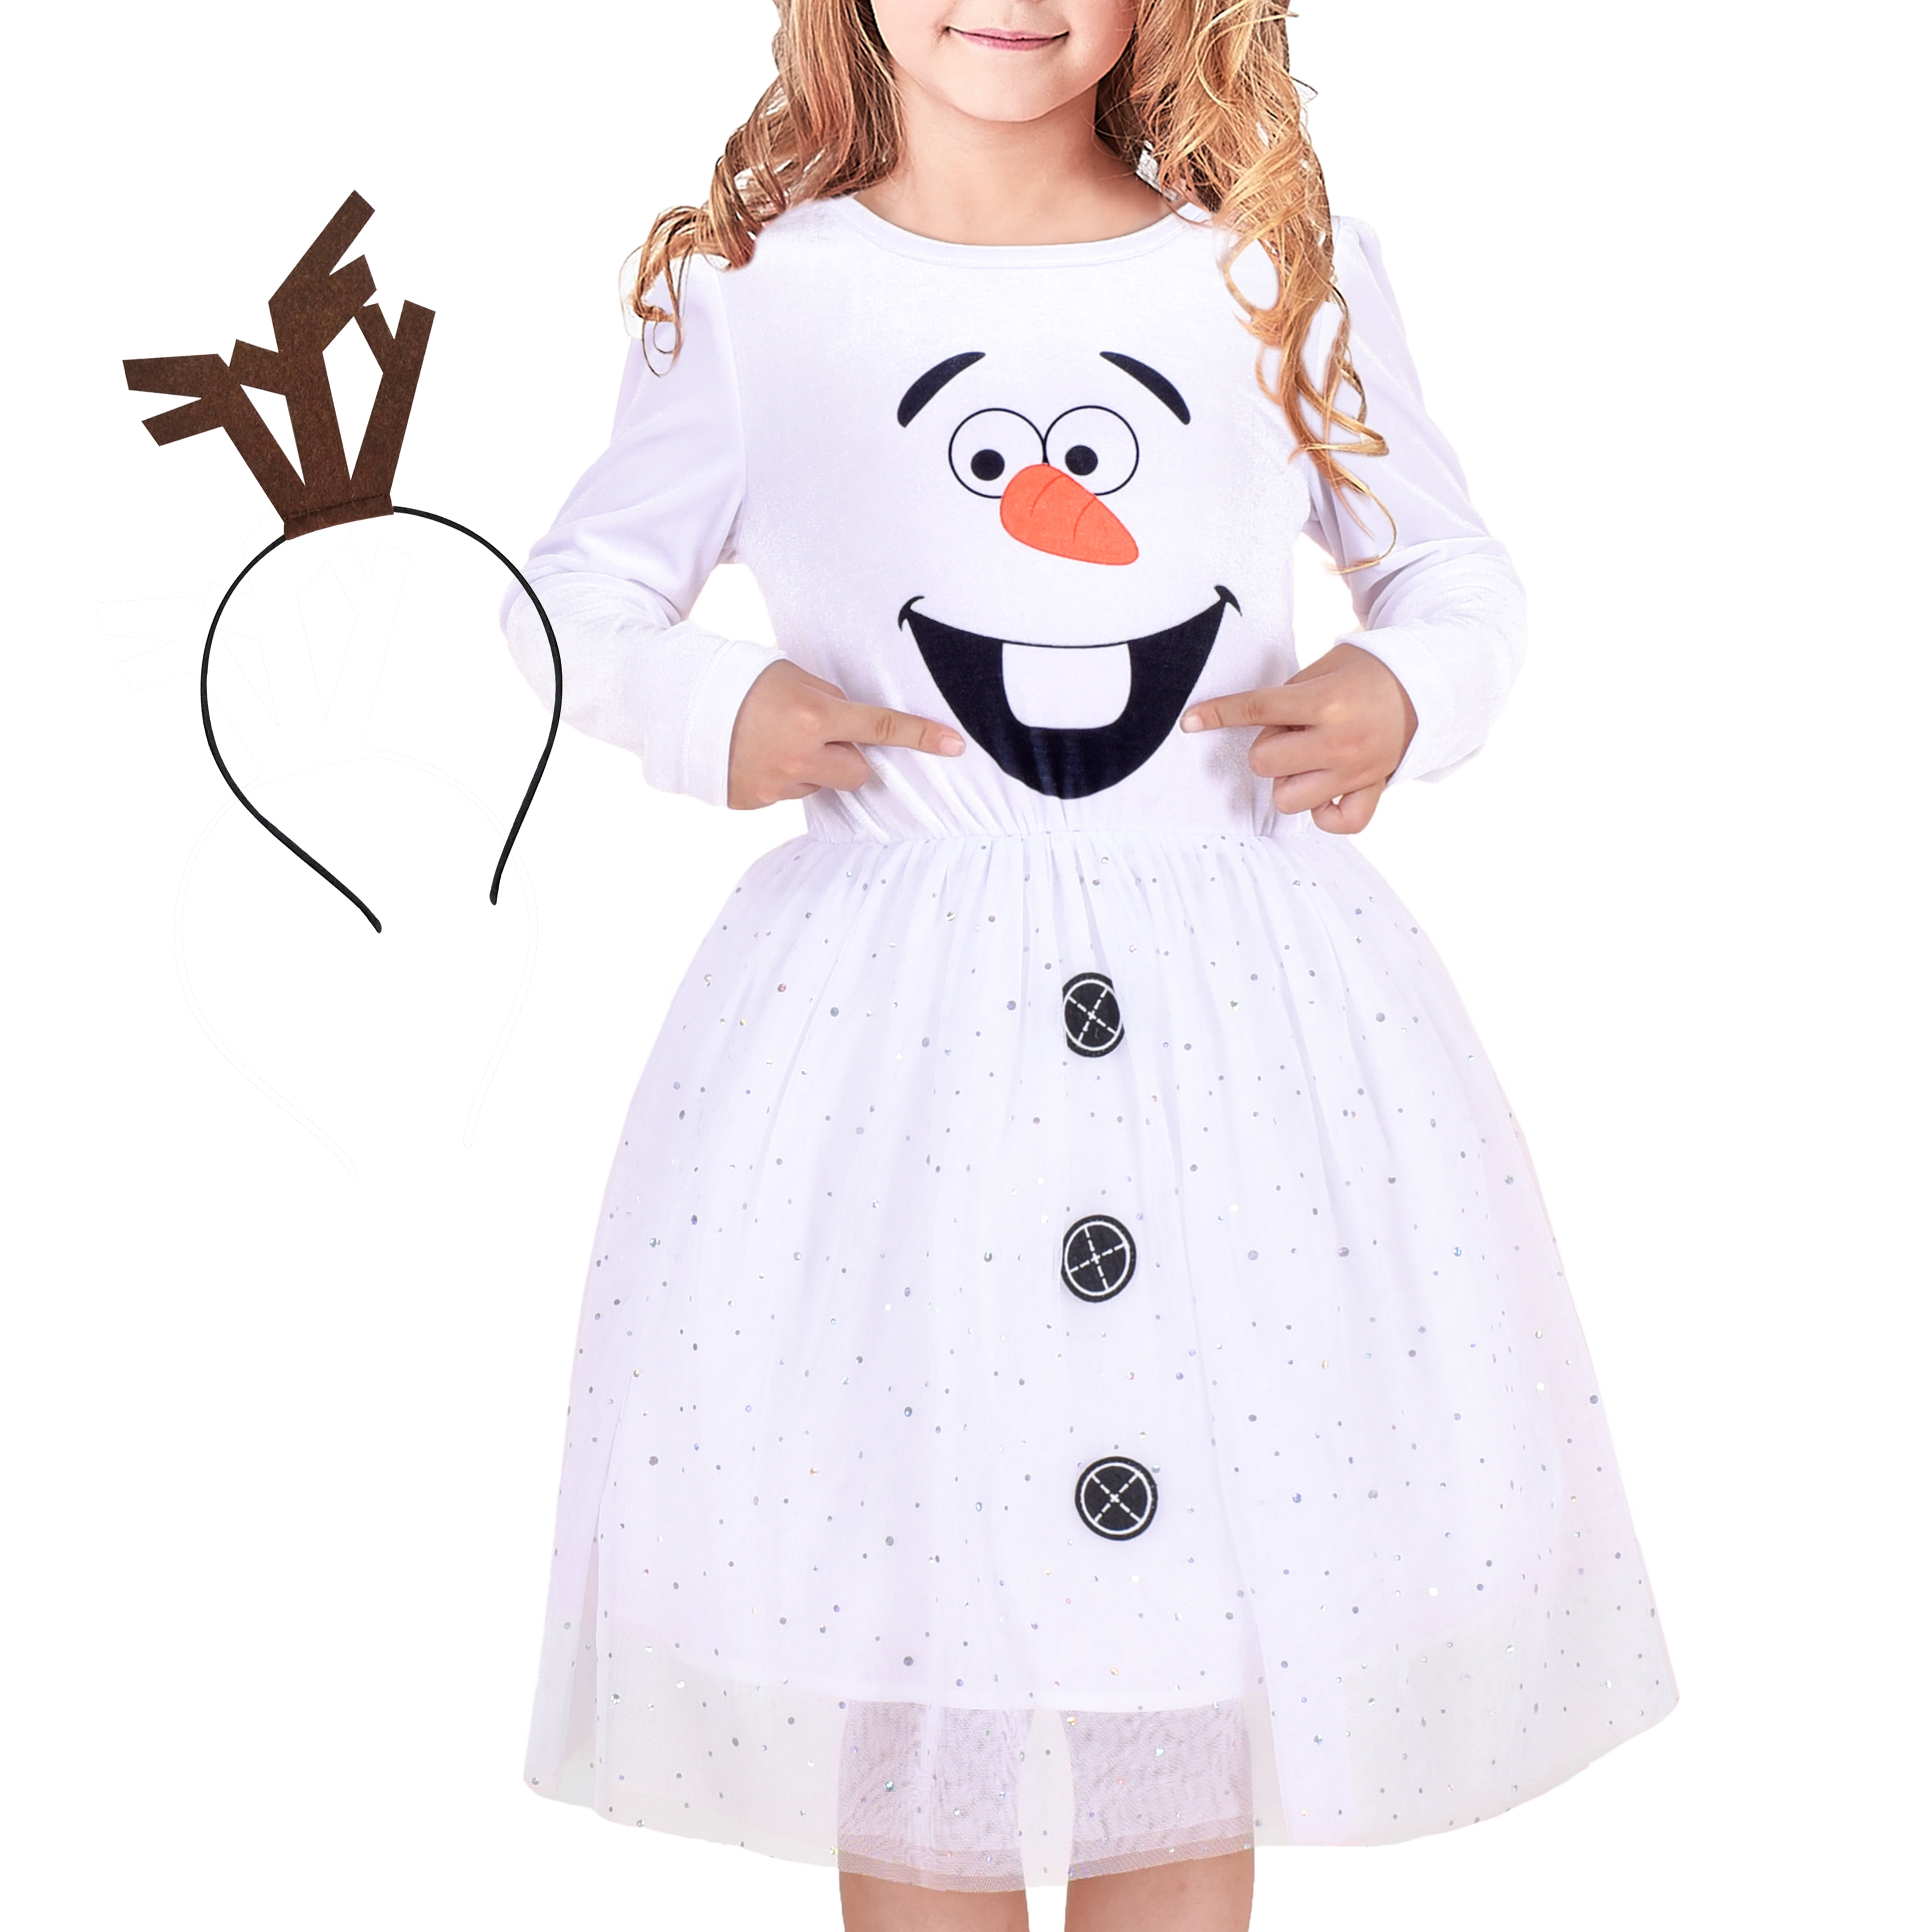 Book Day Christmas Party 5-7 Years Kids Snowman Fancy Dress Costume 